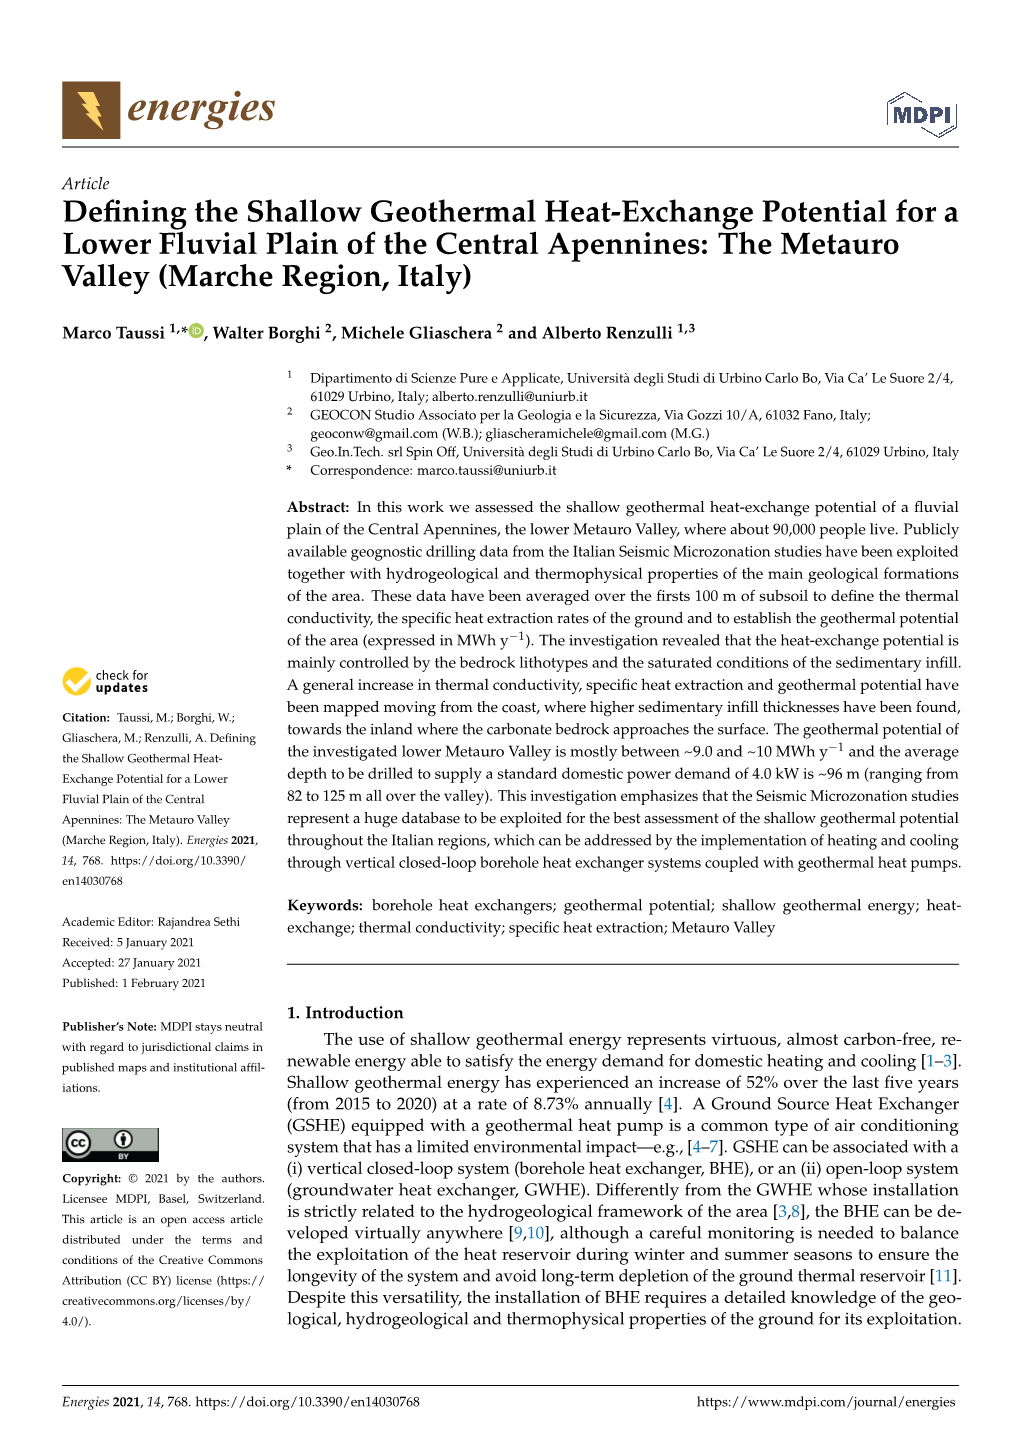 Defining the Shallow Geothermal Heat-Exchange Potential for a Lower Fluvial Plain of the Central Apennines: the Metauro Valley (